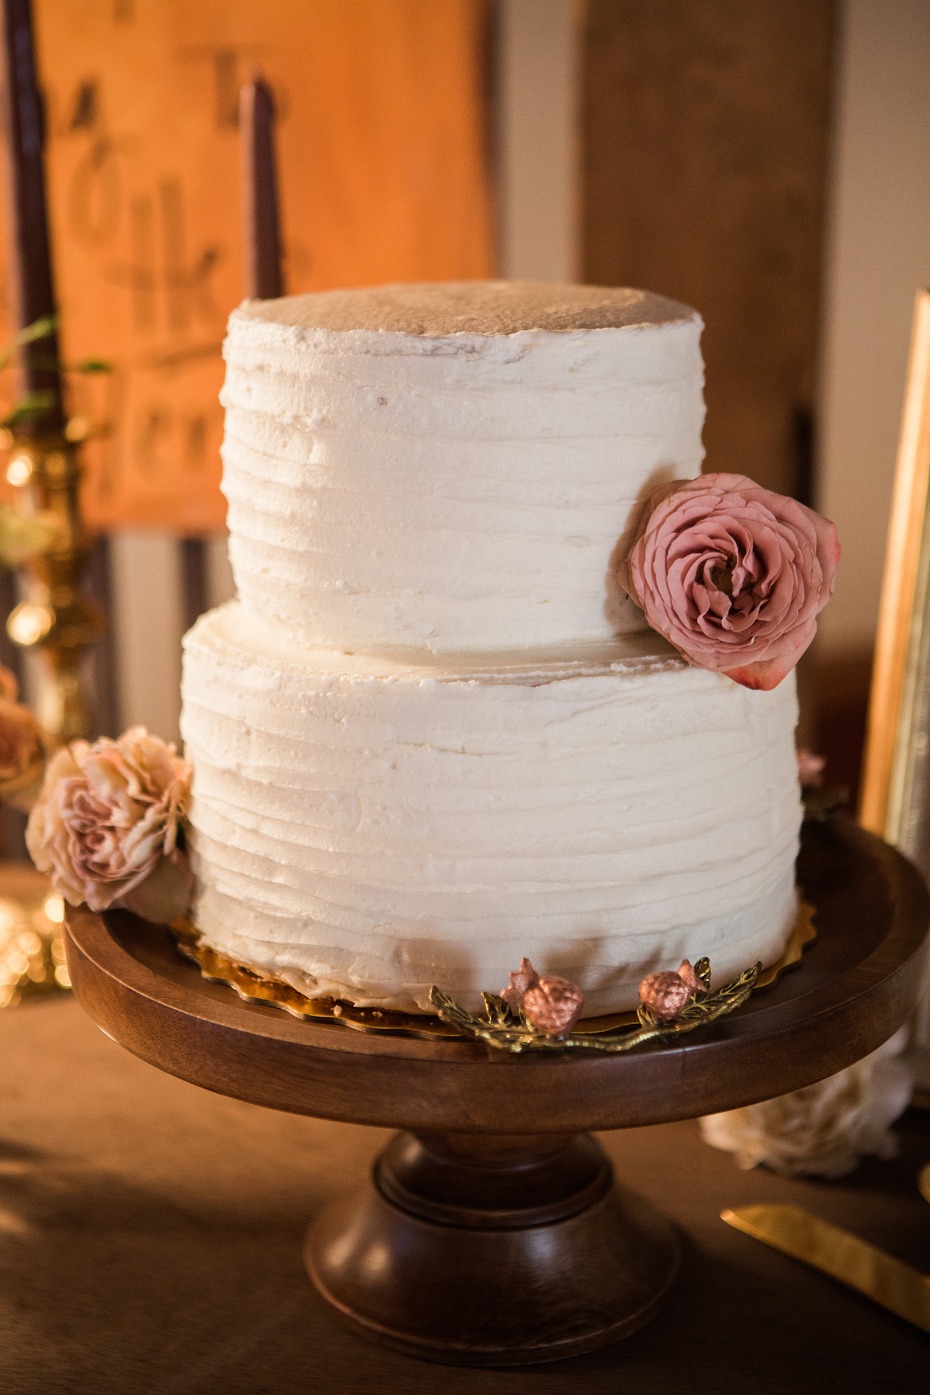 classic white wedding cake with rose accents